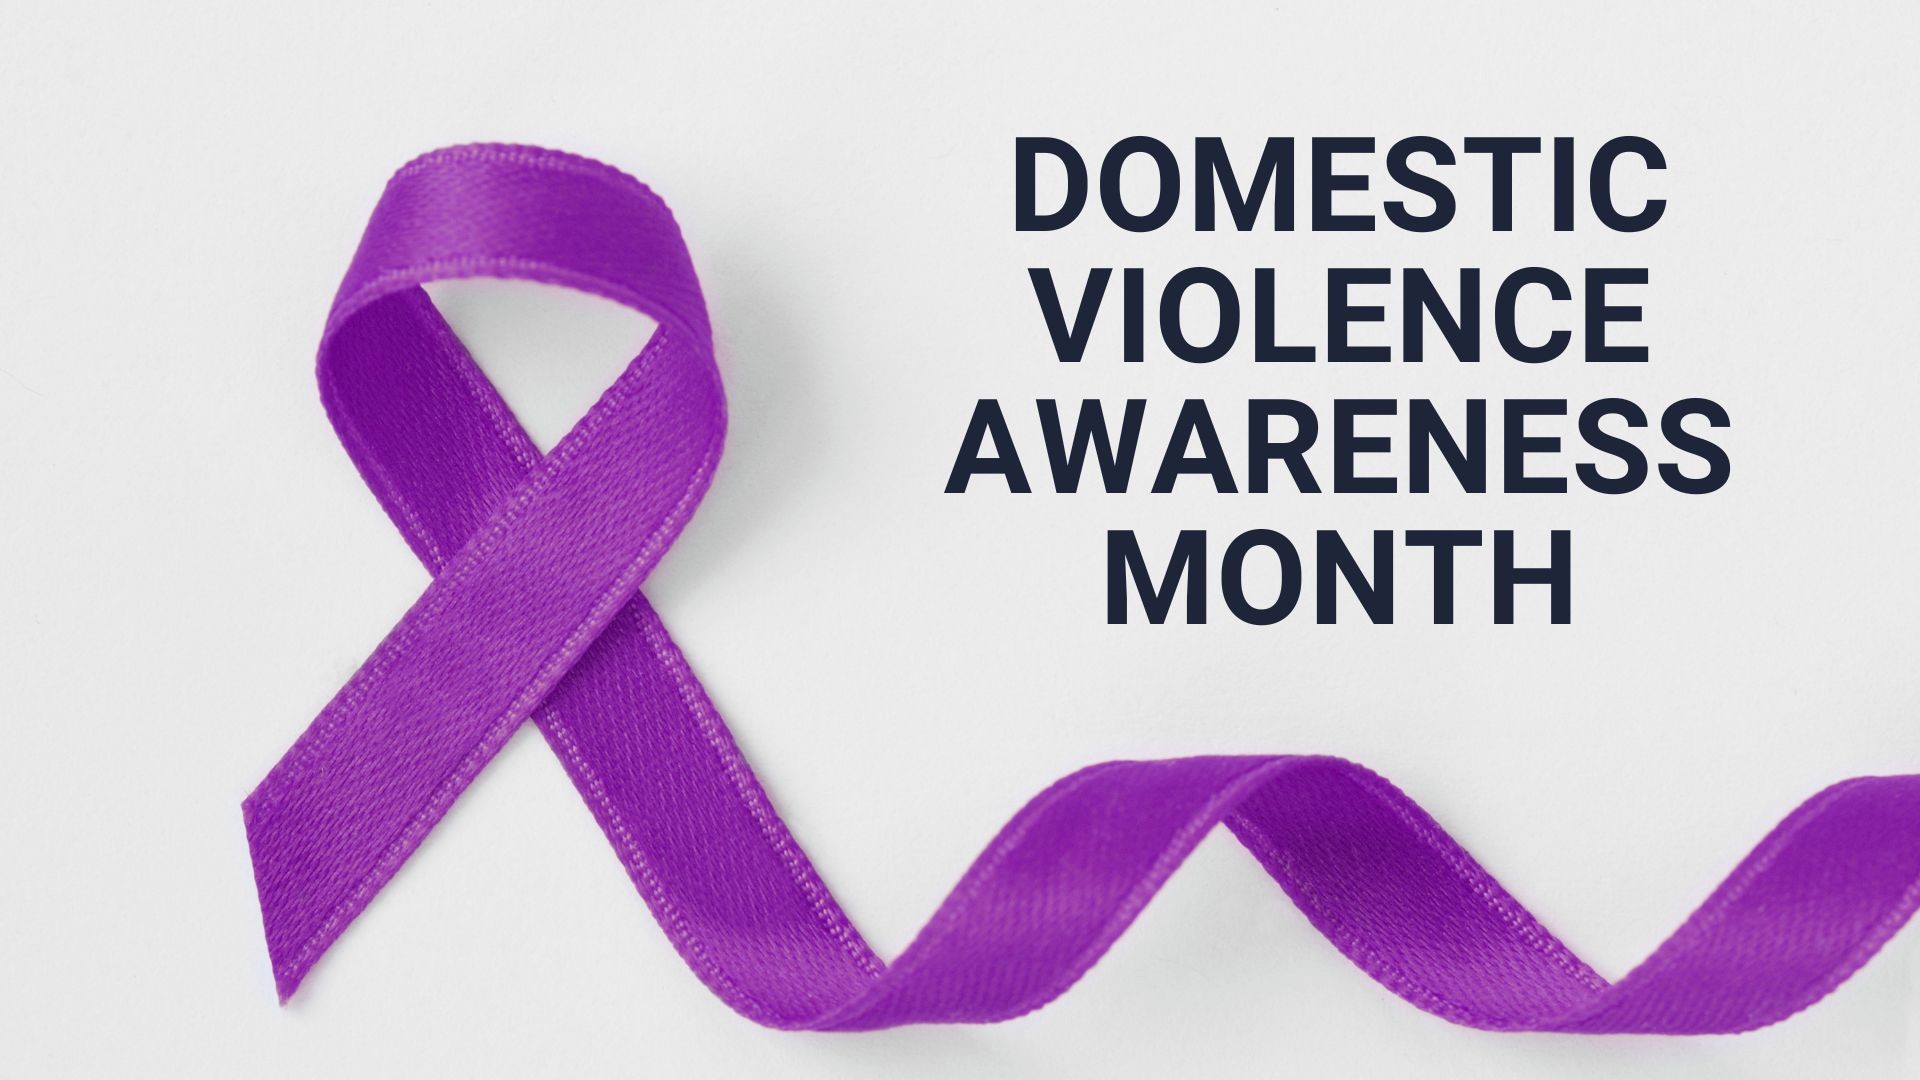 October is Domestic Violence Awareness Month. This special focuses on the signs of those experiencing abuse and the ways and organizations trying to help.